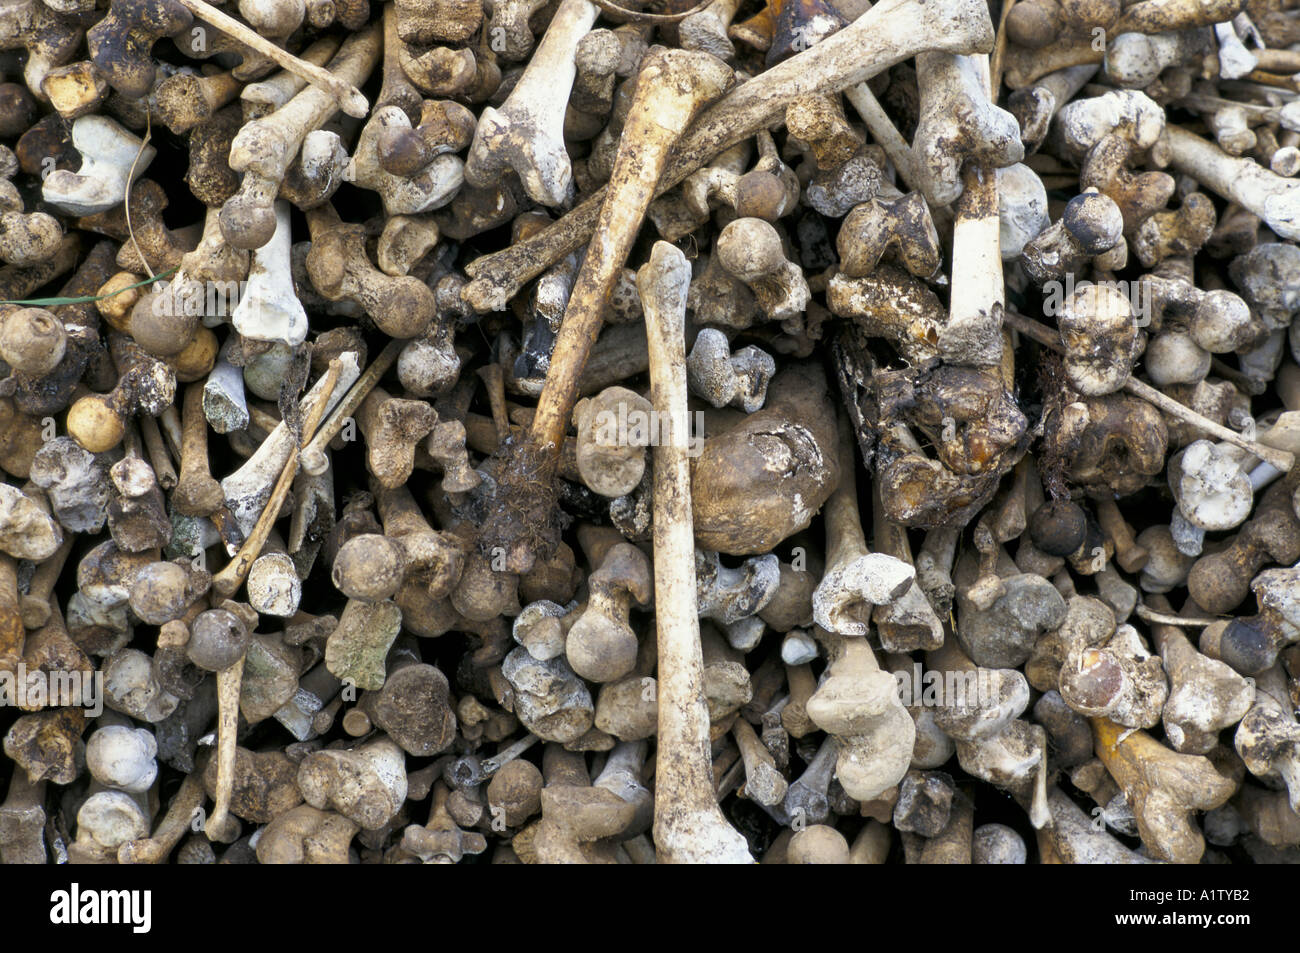 RWANDA.Leg bones collected at site of BISESERO MASSACRE , small village where all but a few men were killed in the genocide. Stock Photo